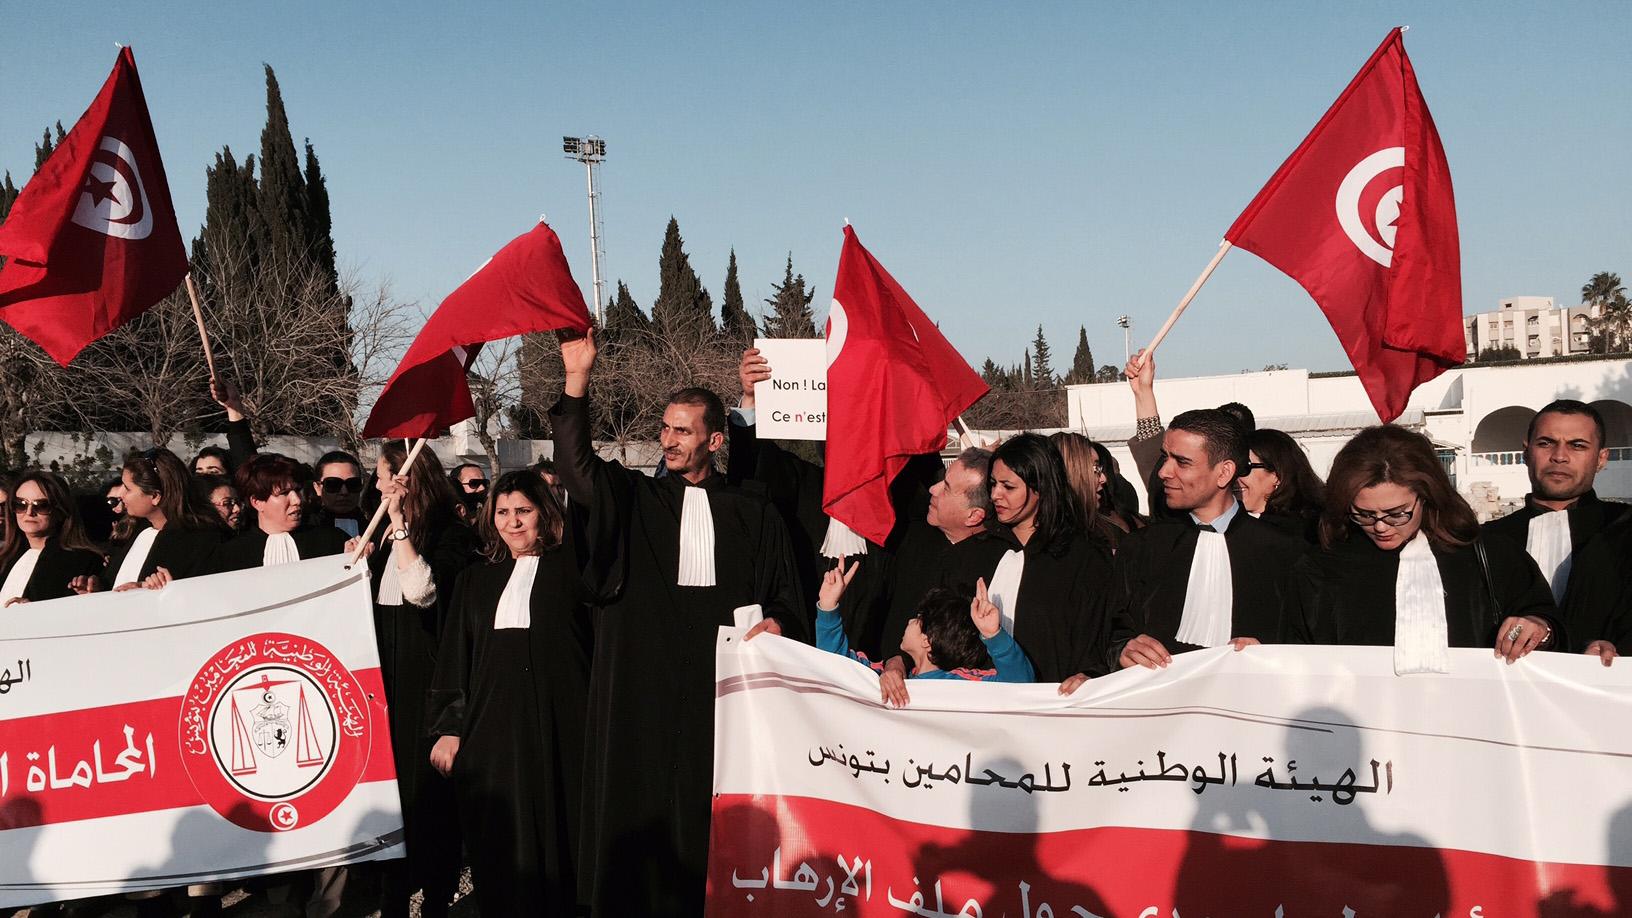 Lawyers at a protest in Tunis against extremism on March 19, 2015, a day after gunmen killed more than 20 people in the Tunisian capital.